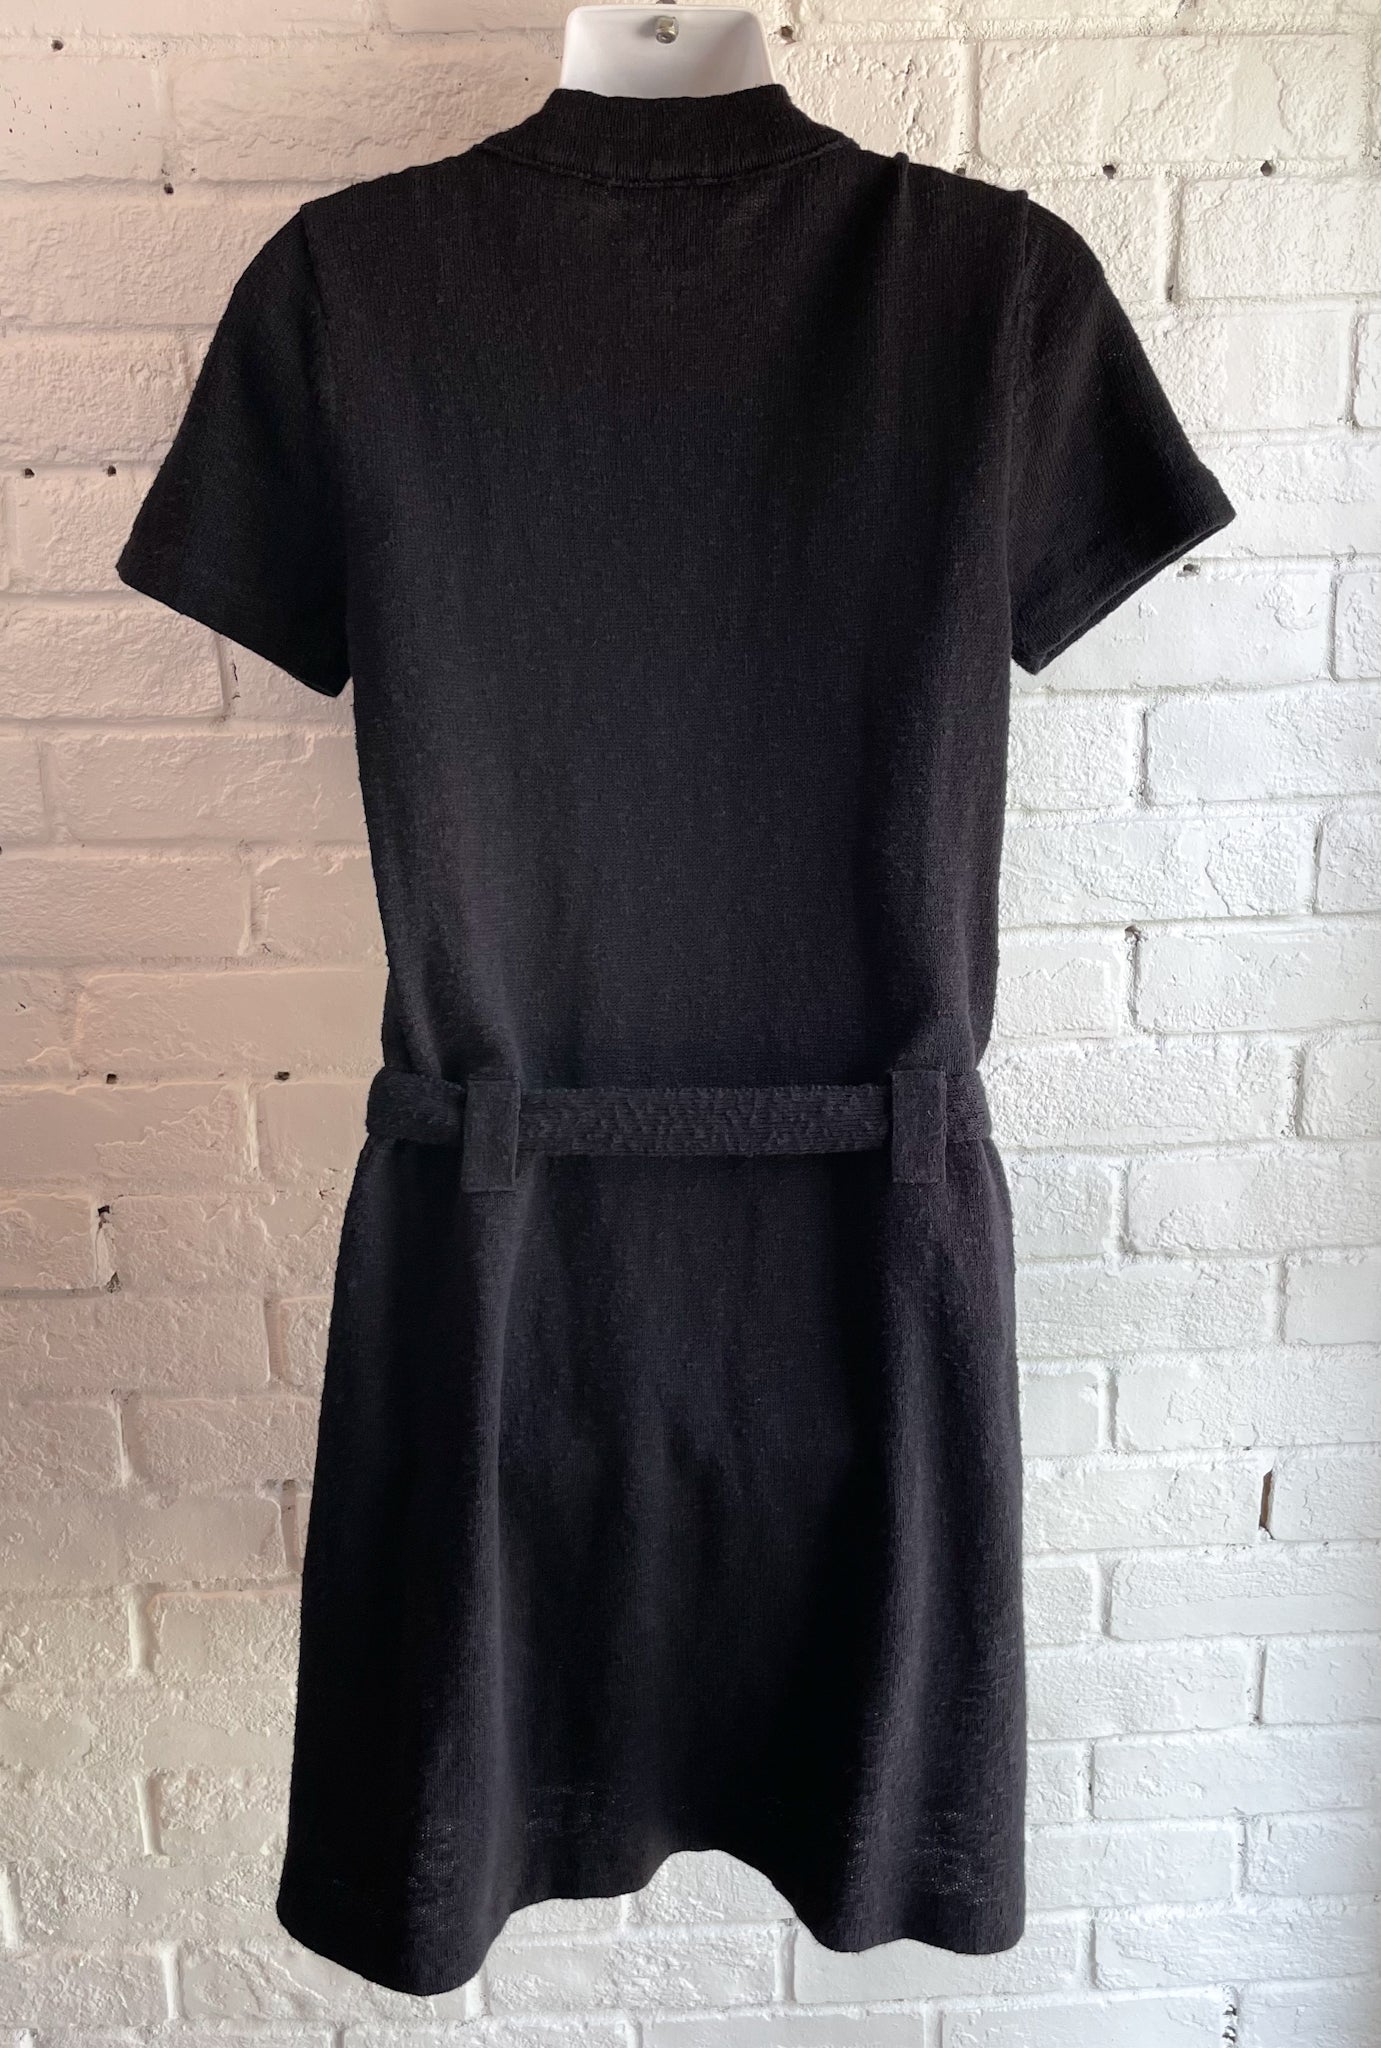 Tory Burch Black Cotton Linen Button Front Belted Utility Knit Dress - Small